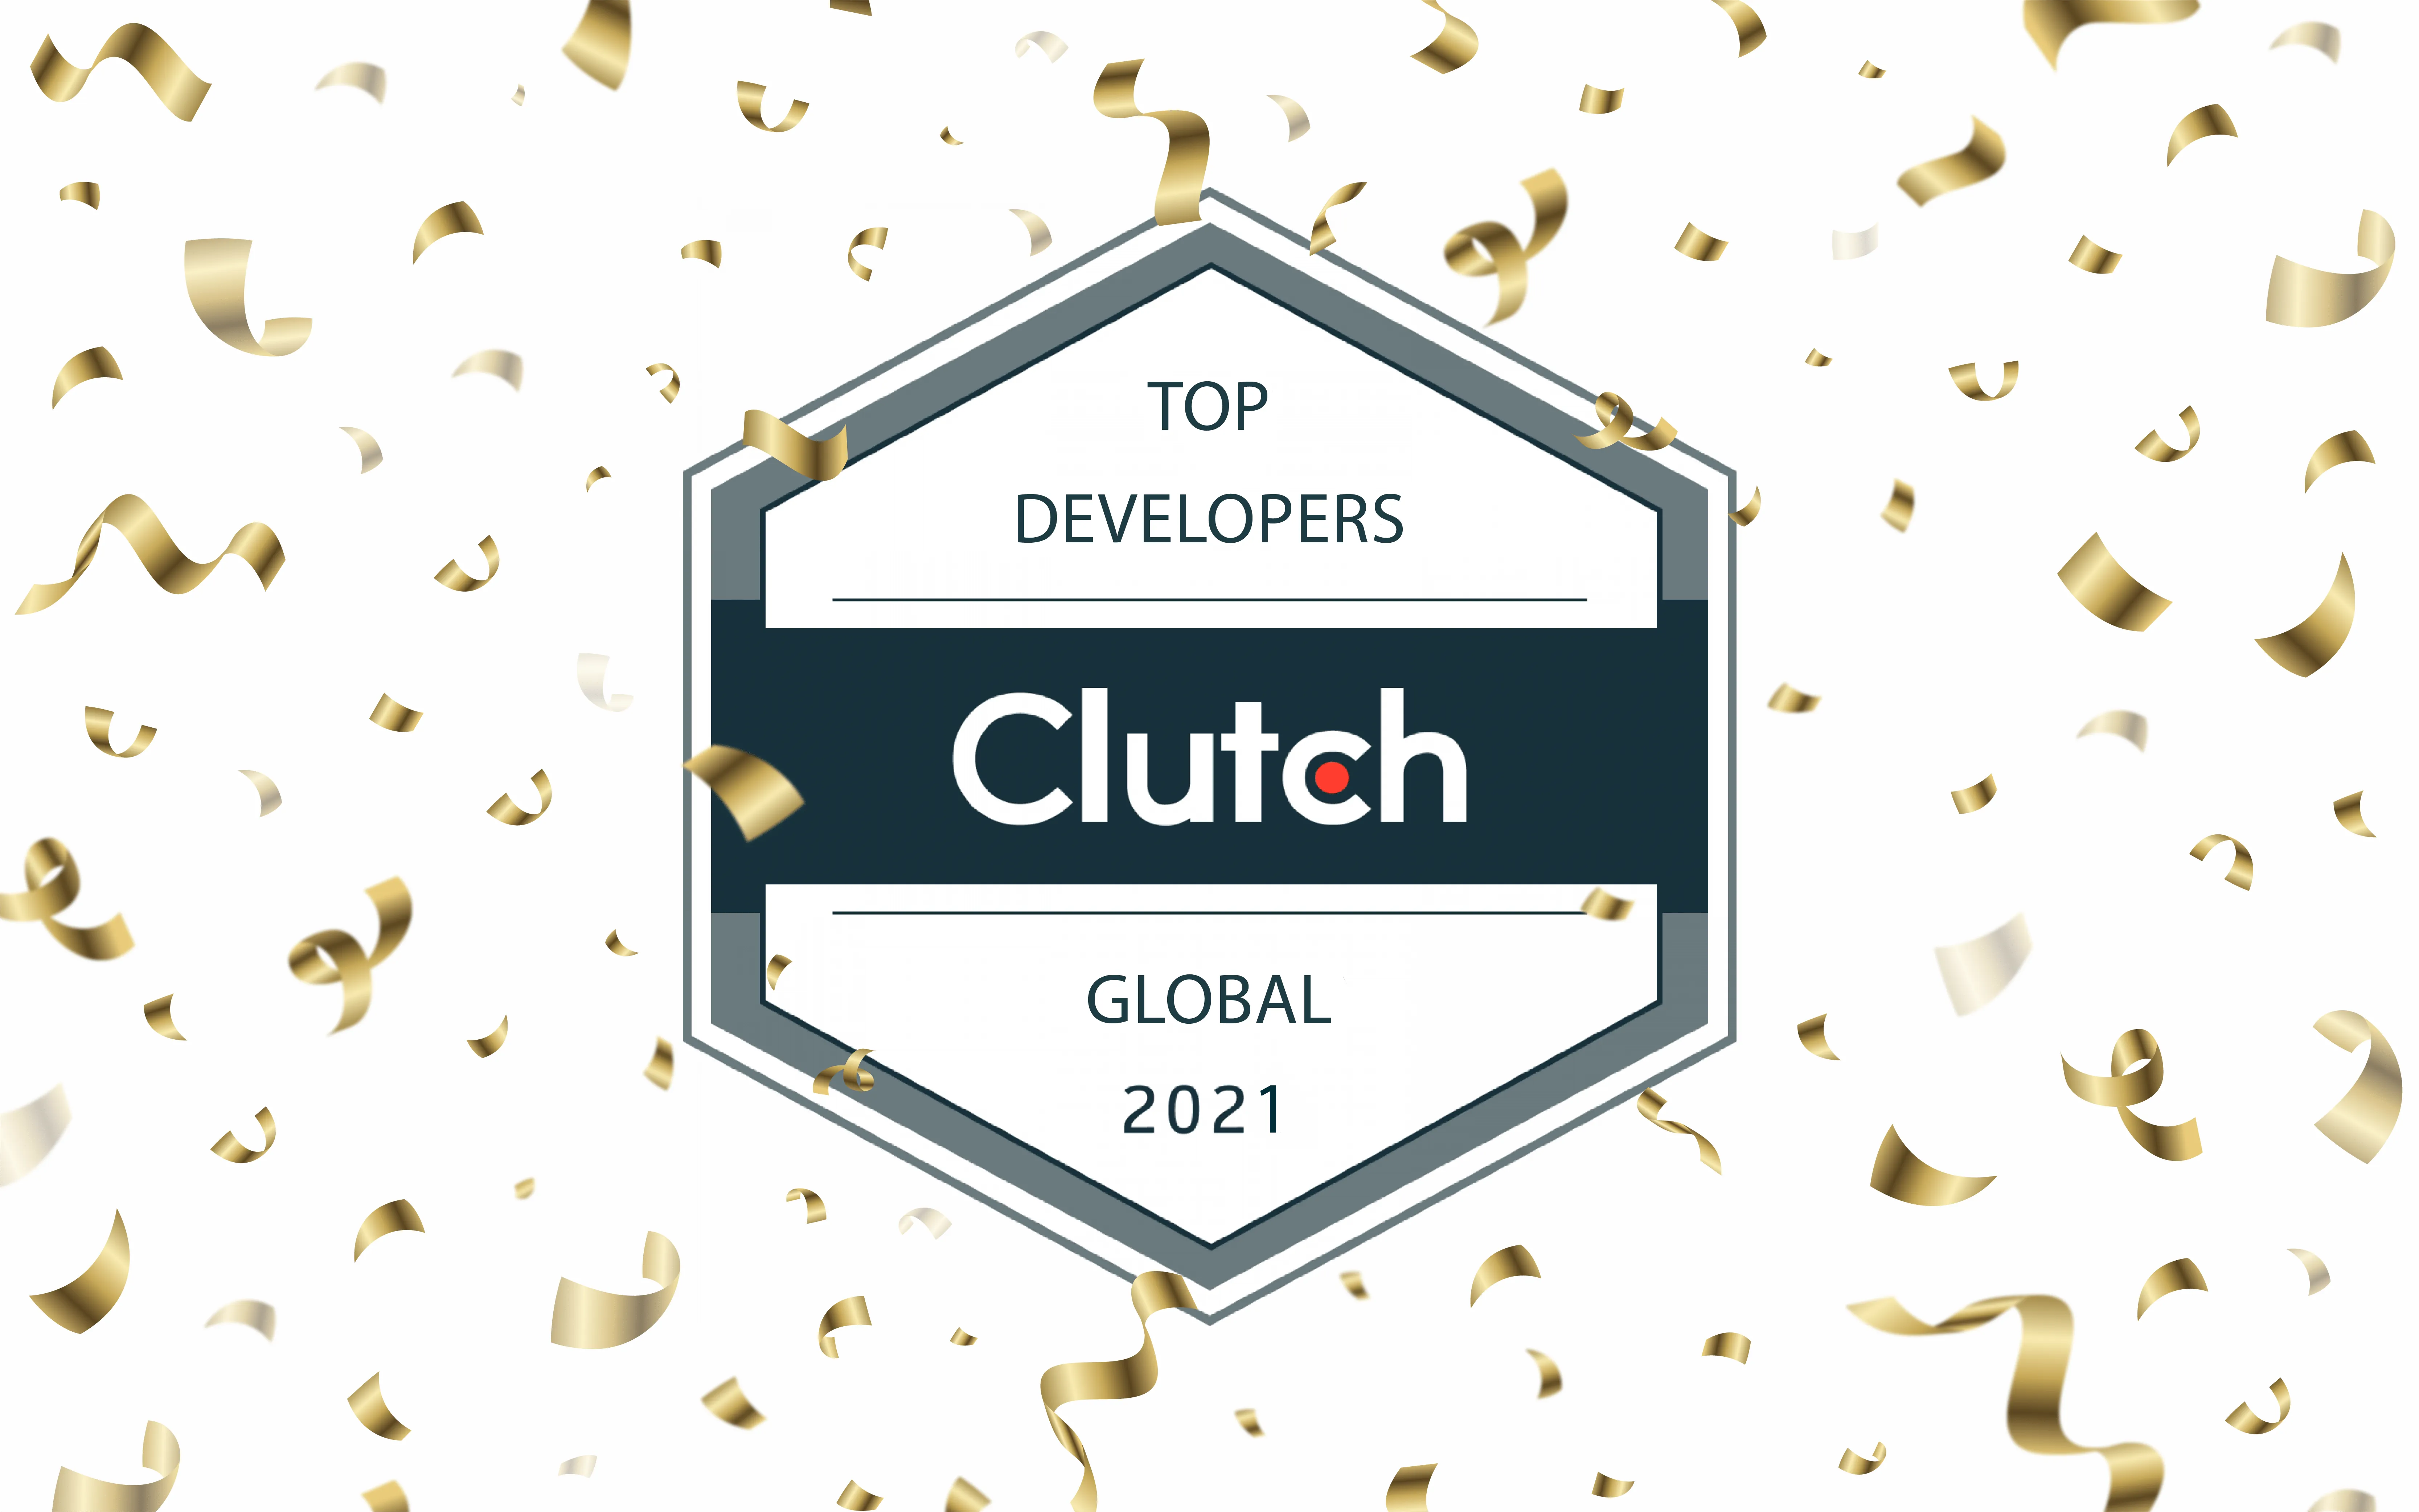 Clutch top web developers for 2021